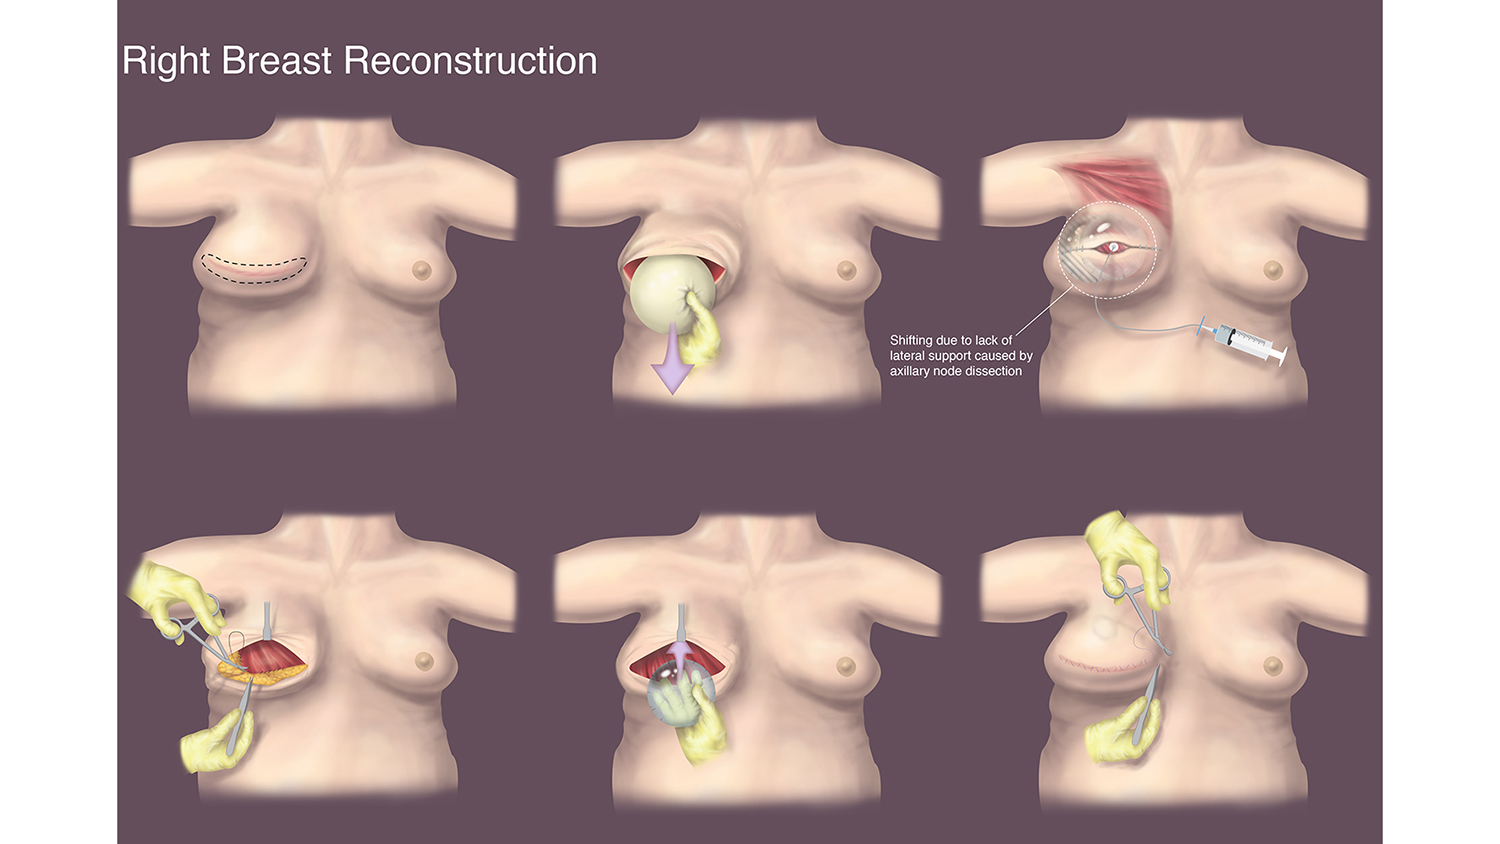 An illustration of a right breast reconstruction 